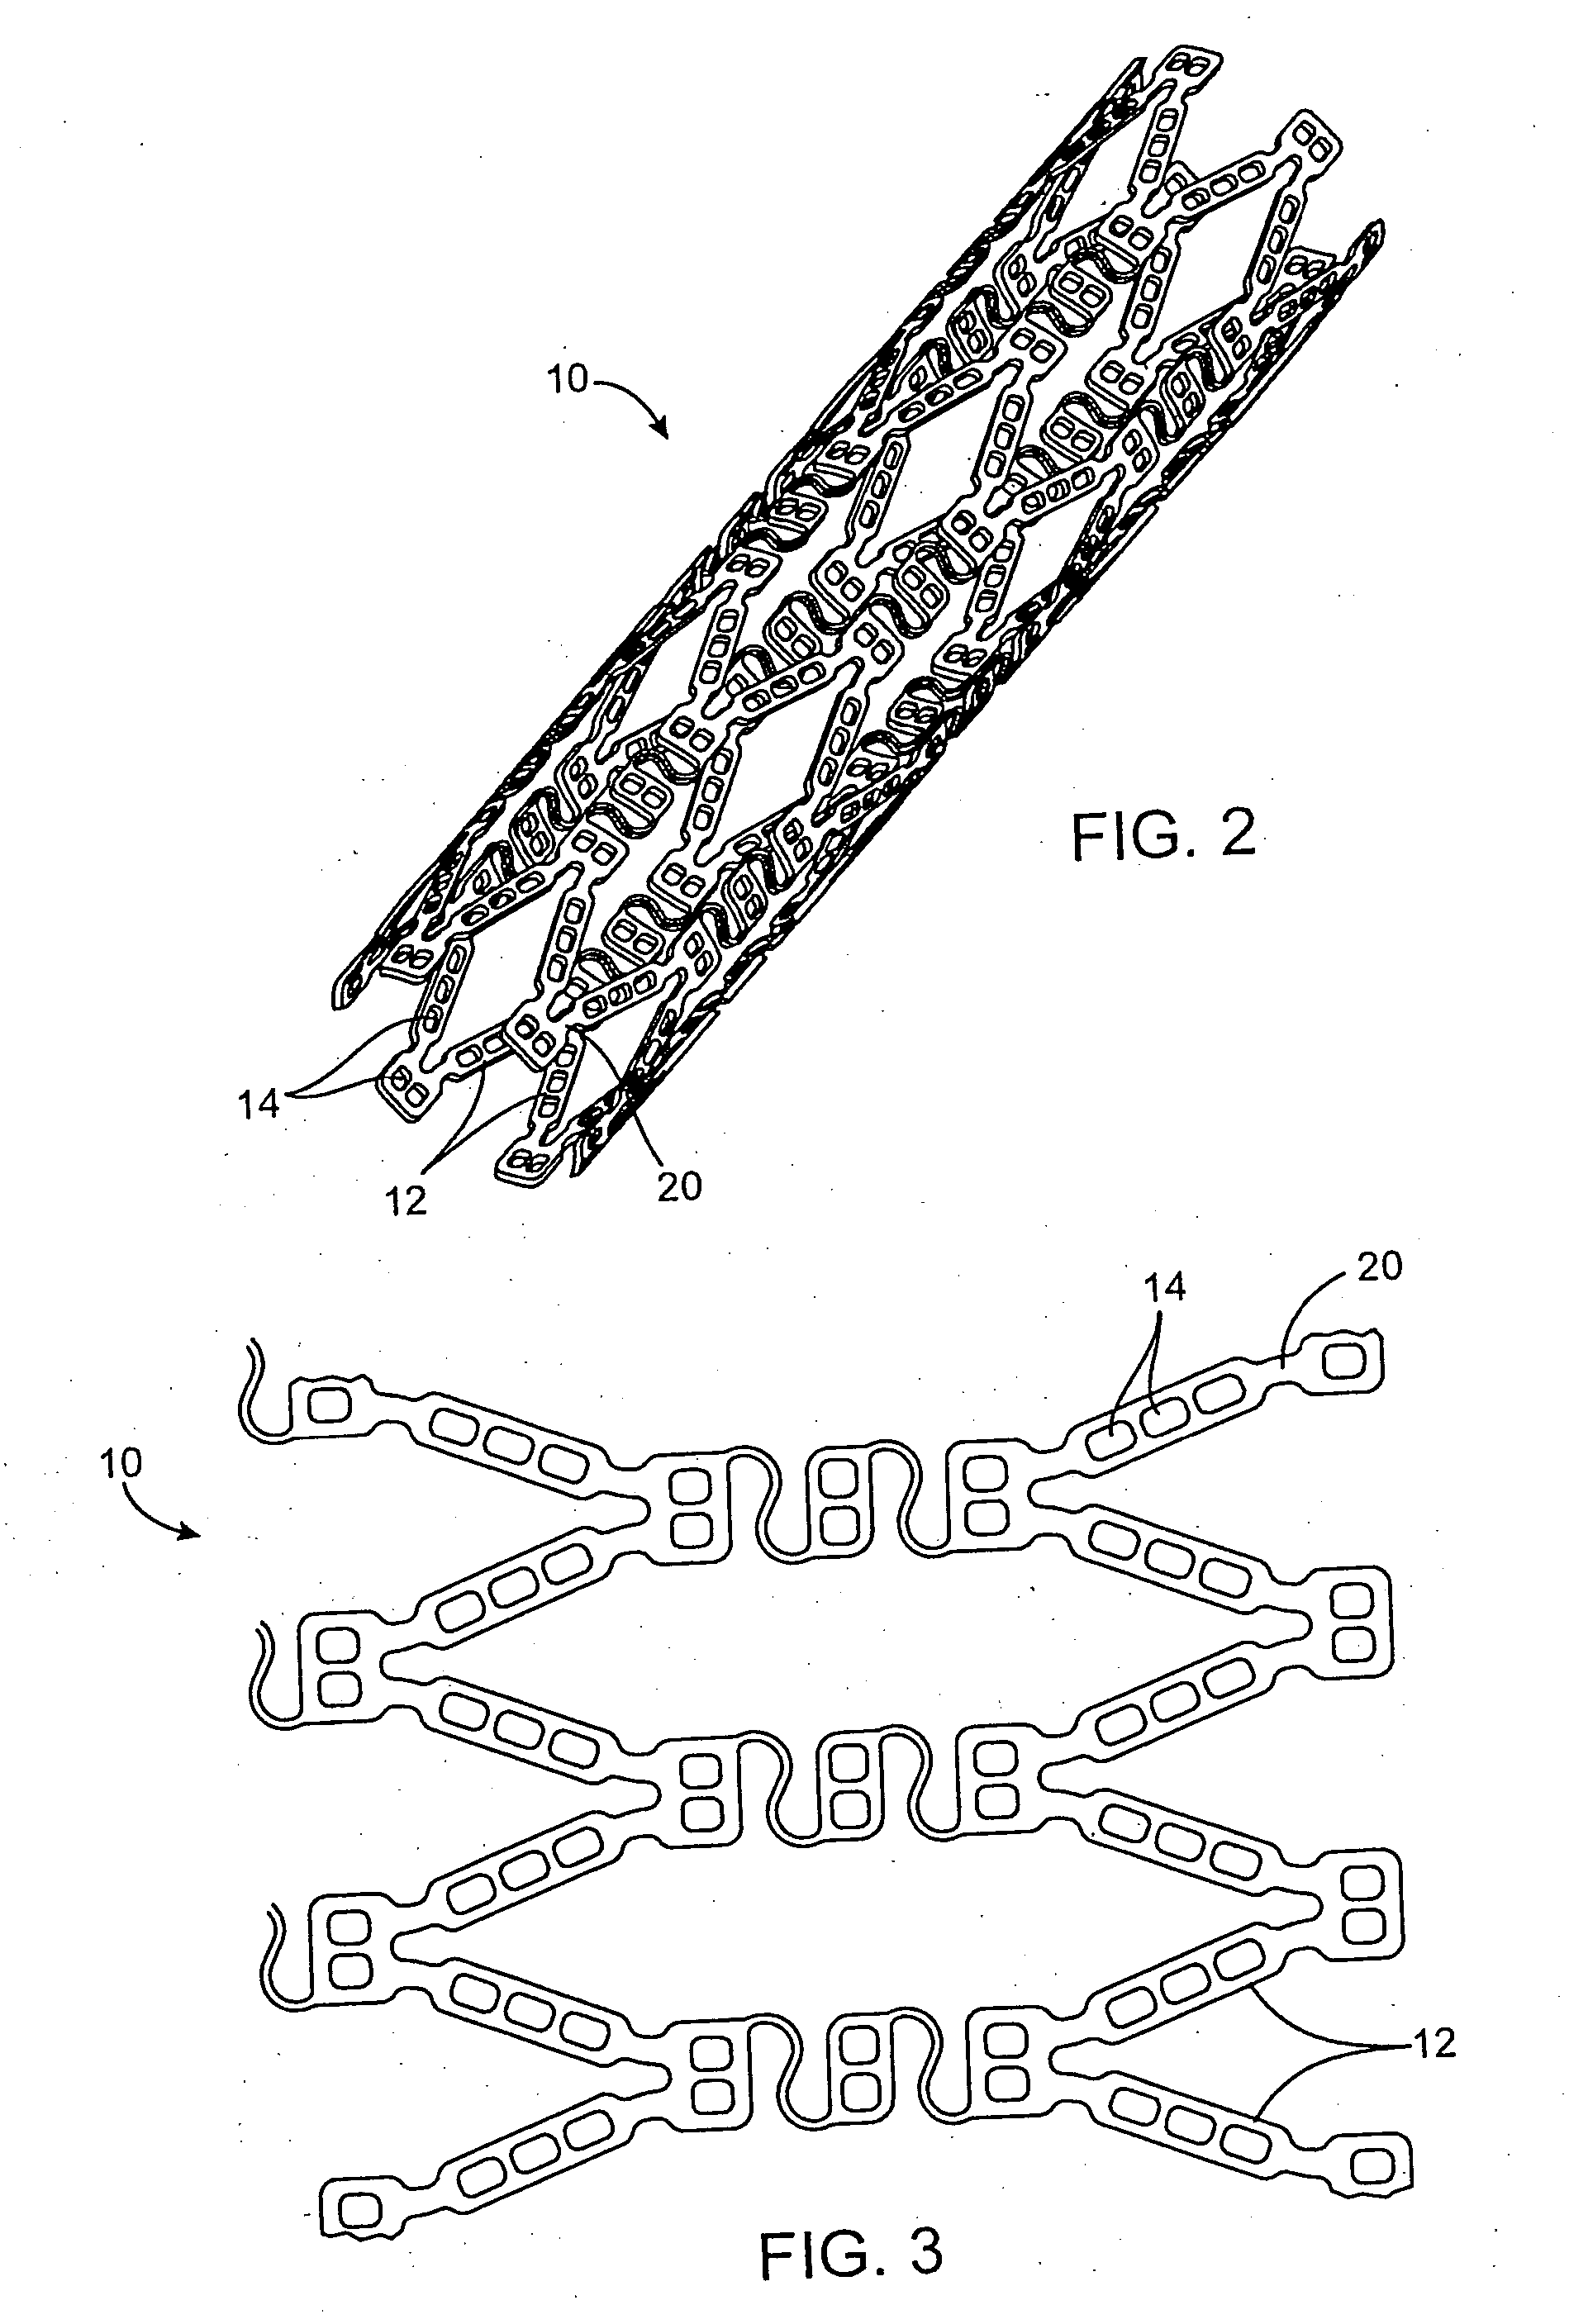 Method and apparatus for reducing tissue damage after ischemic injury